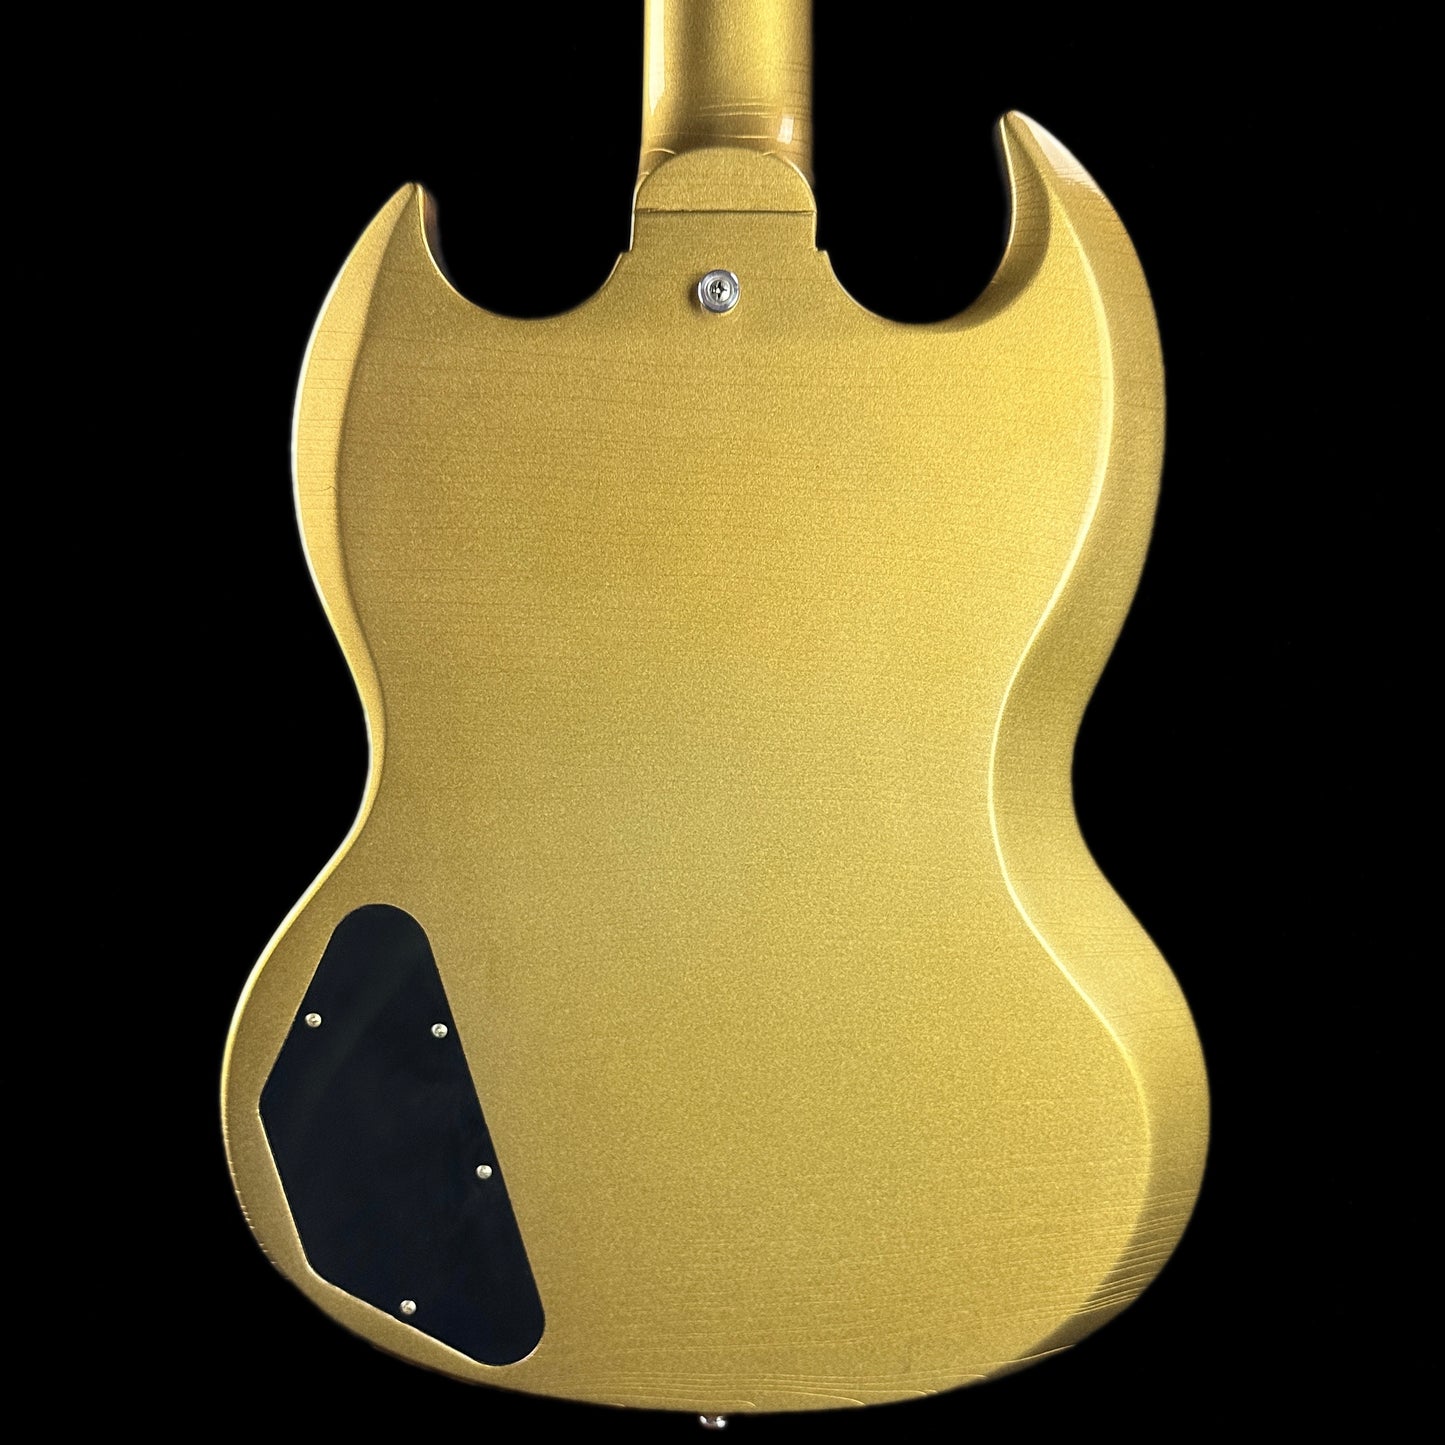 Back of body of Gibson Custom Shop M2M 61 SG Standard Double Gold Stop Bar Murphy Lab Ultra Light Aged.